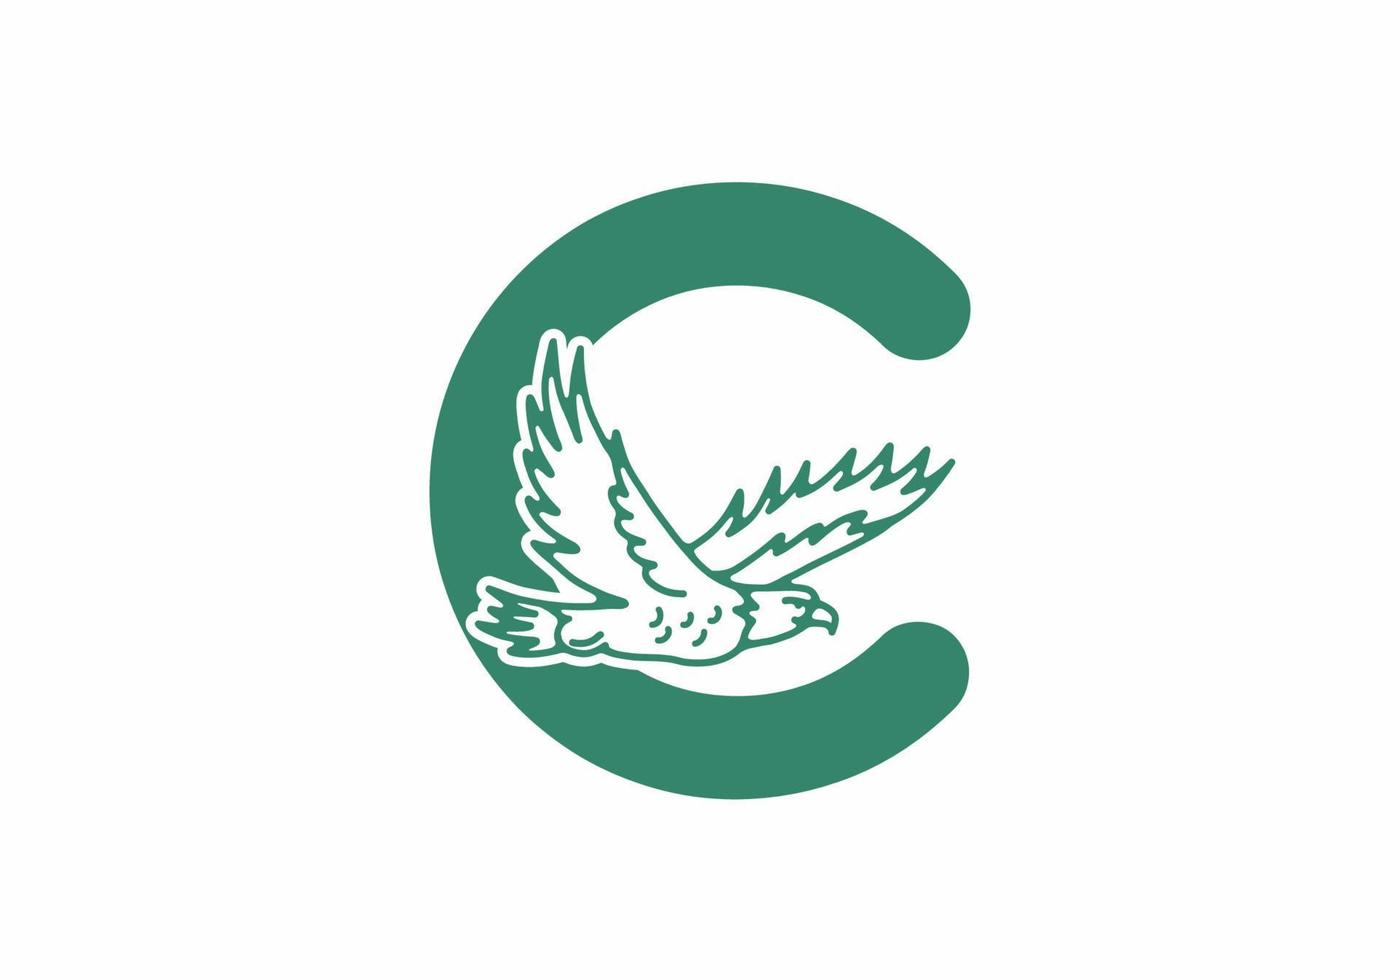 Line art illustration of flying eagle with C initial letter vector